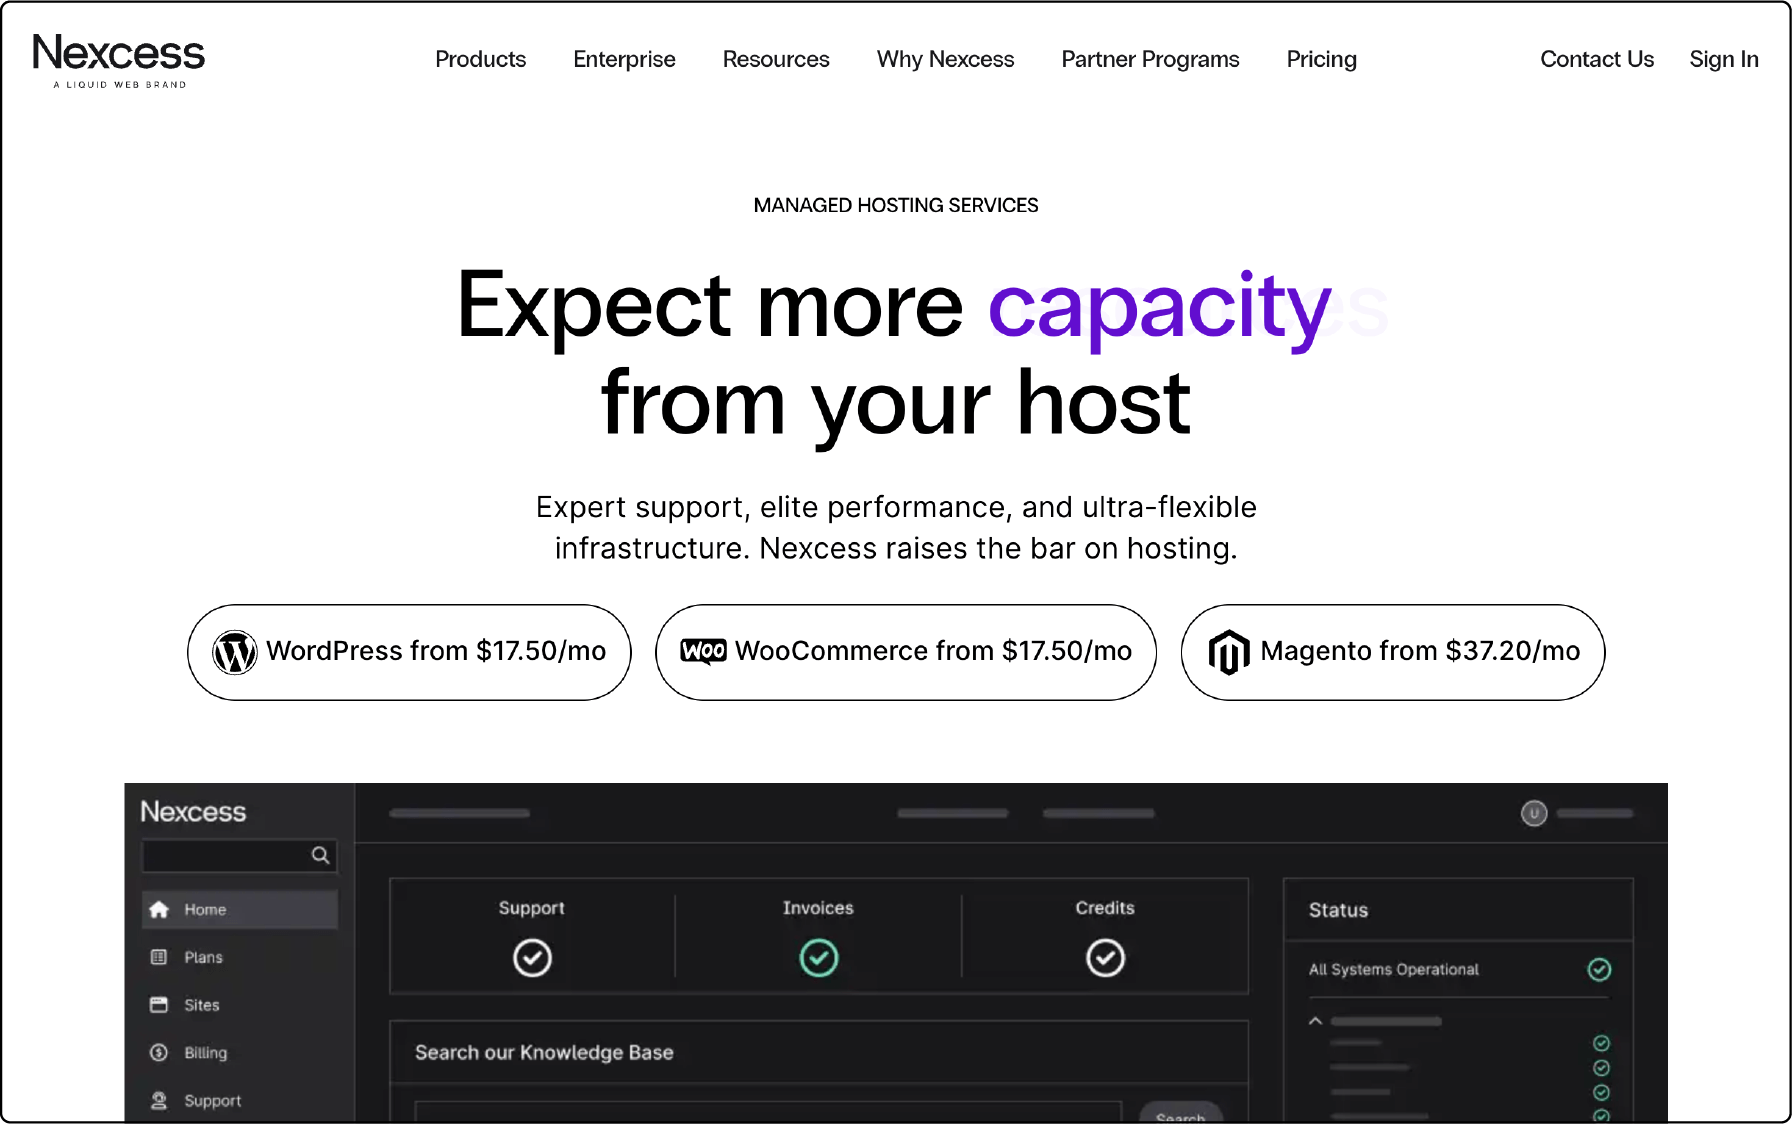 Nexcess homepage showing optimized Magento hosting with advanced security and performance features.